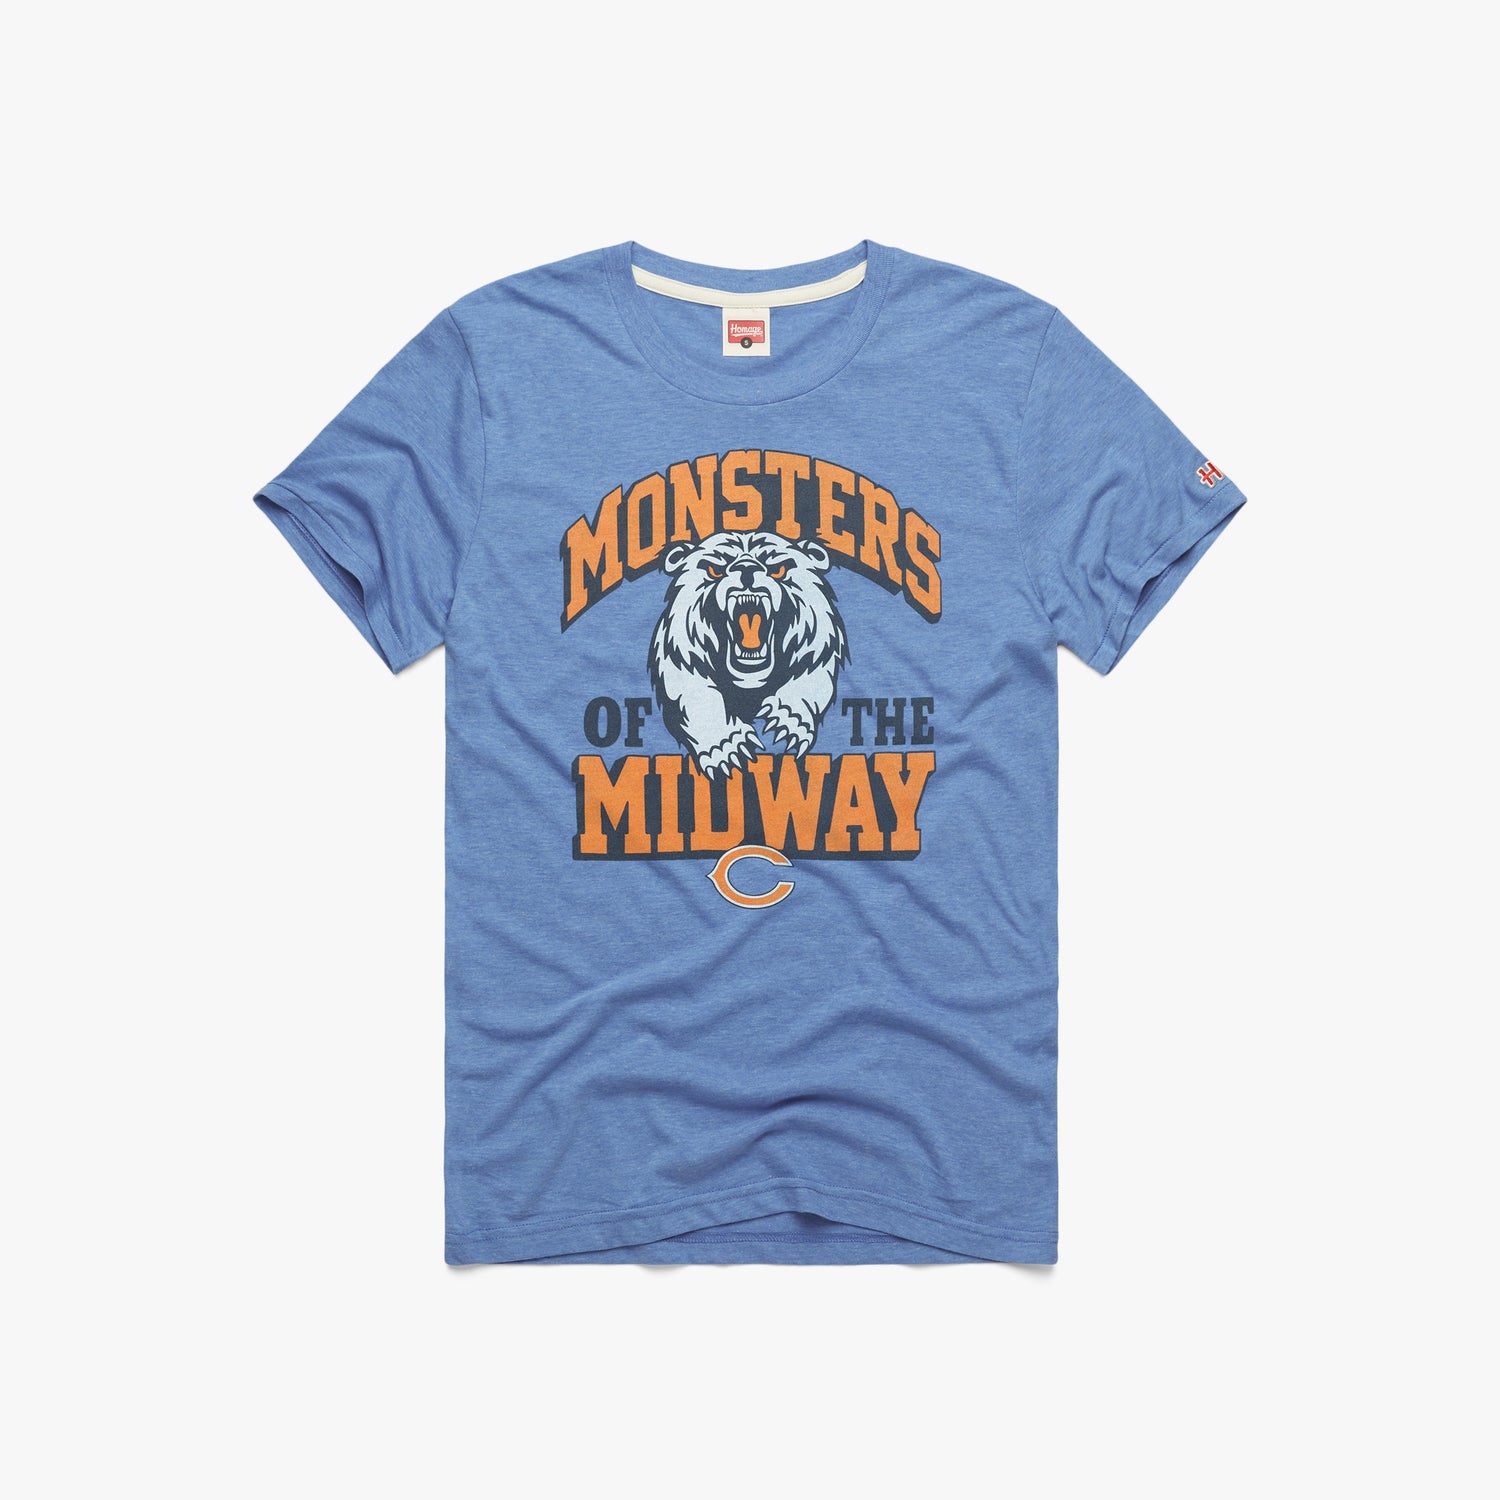 Chicago Bears Monsters of The Midway T-Shirt from Homage. | Officially Licensed Vintage NFL Apparel from Homage Pro Shop.